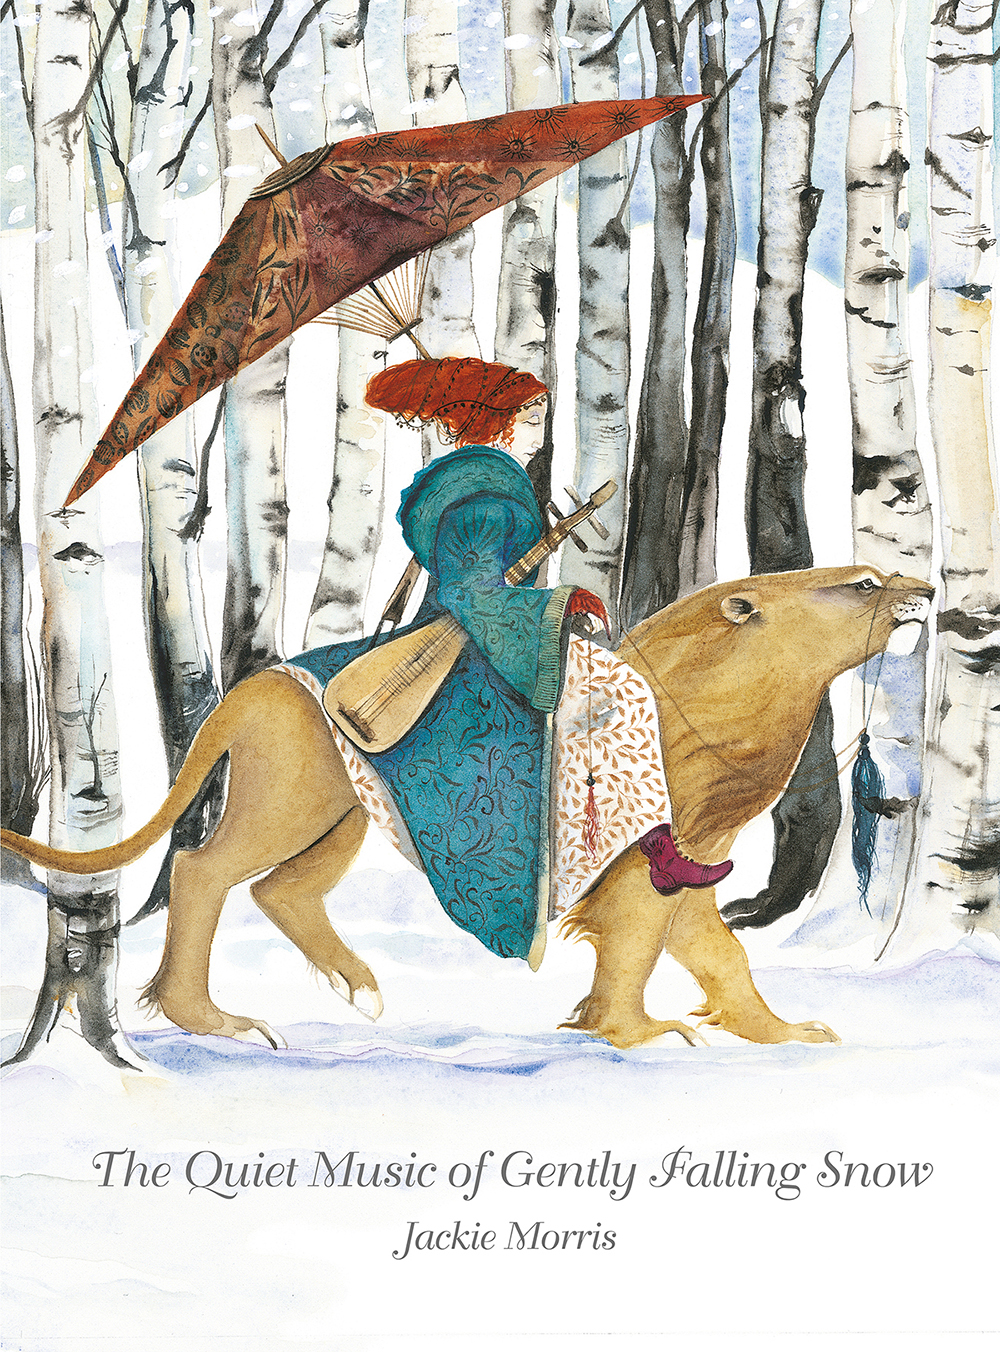 From 'The Quiet Music of Gently Falling Snow' by Jackie Morris